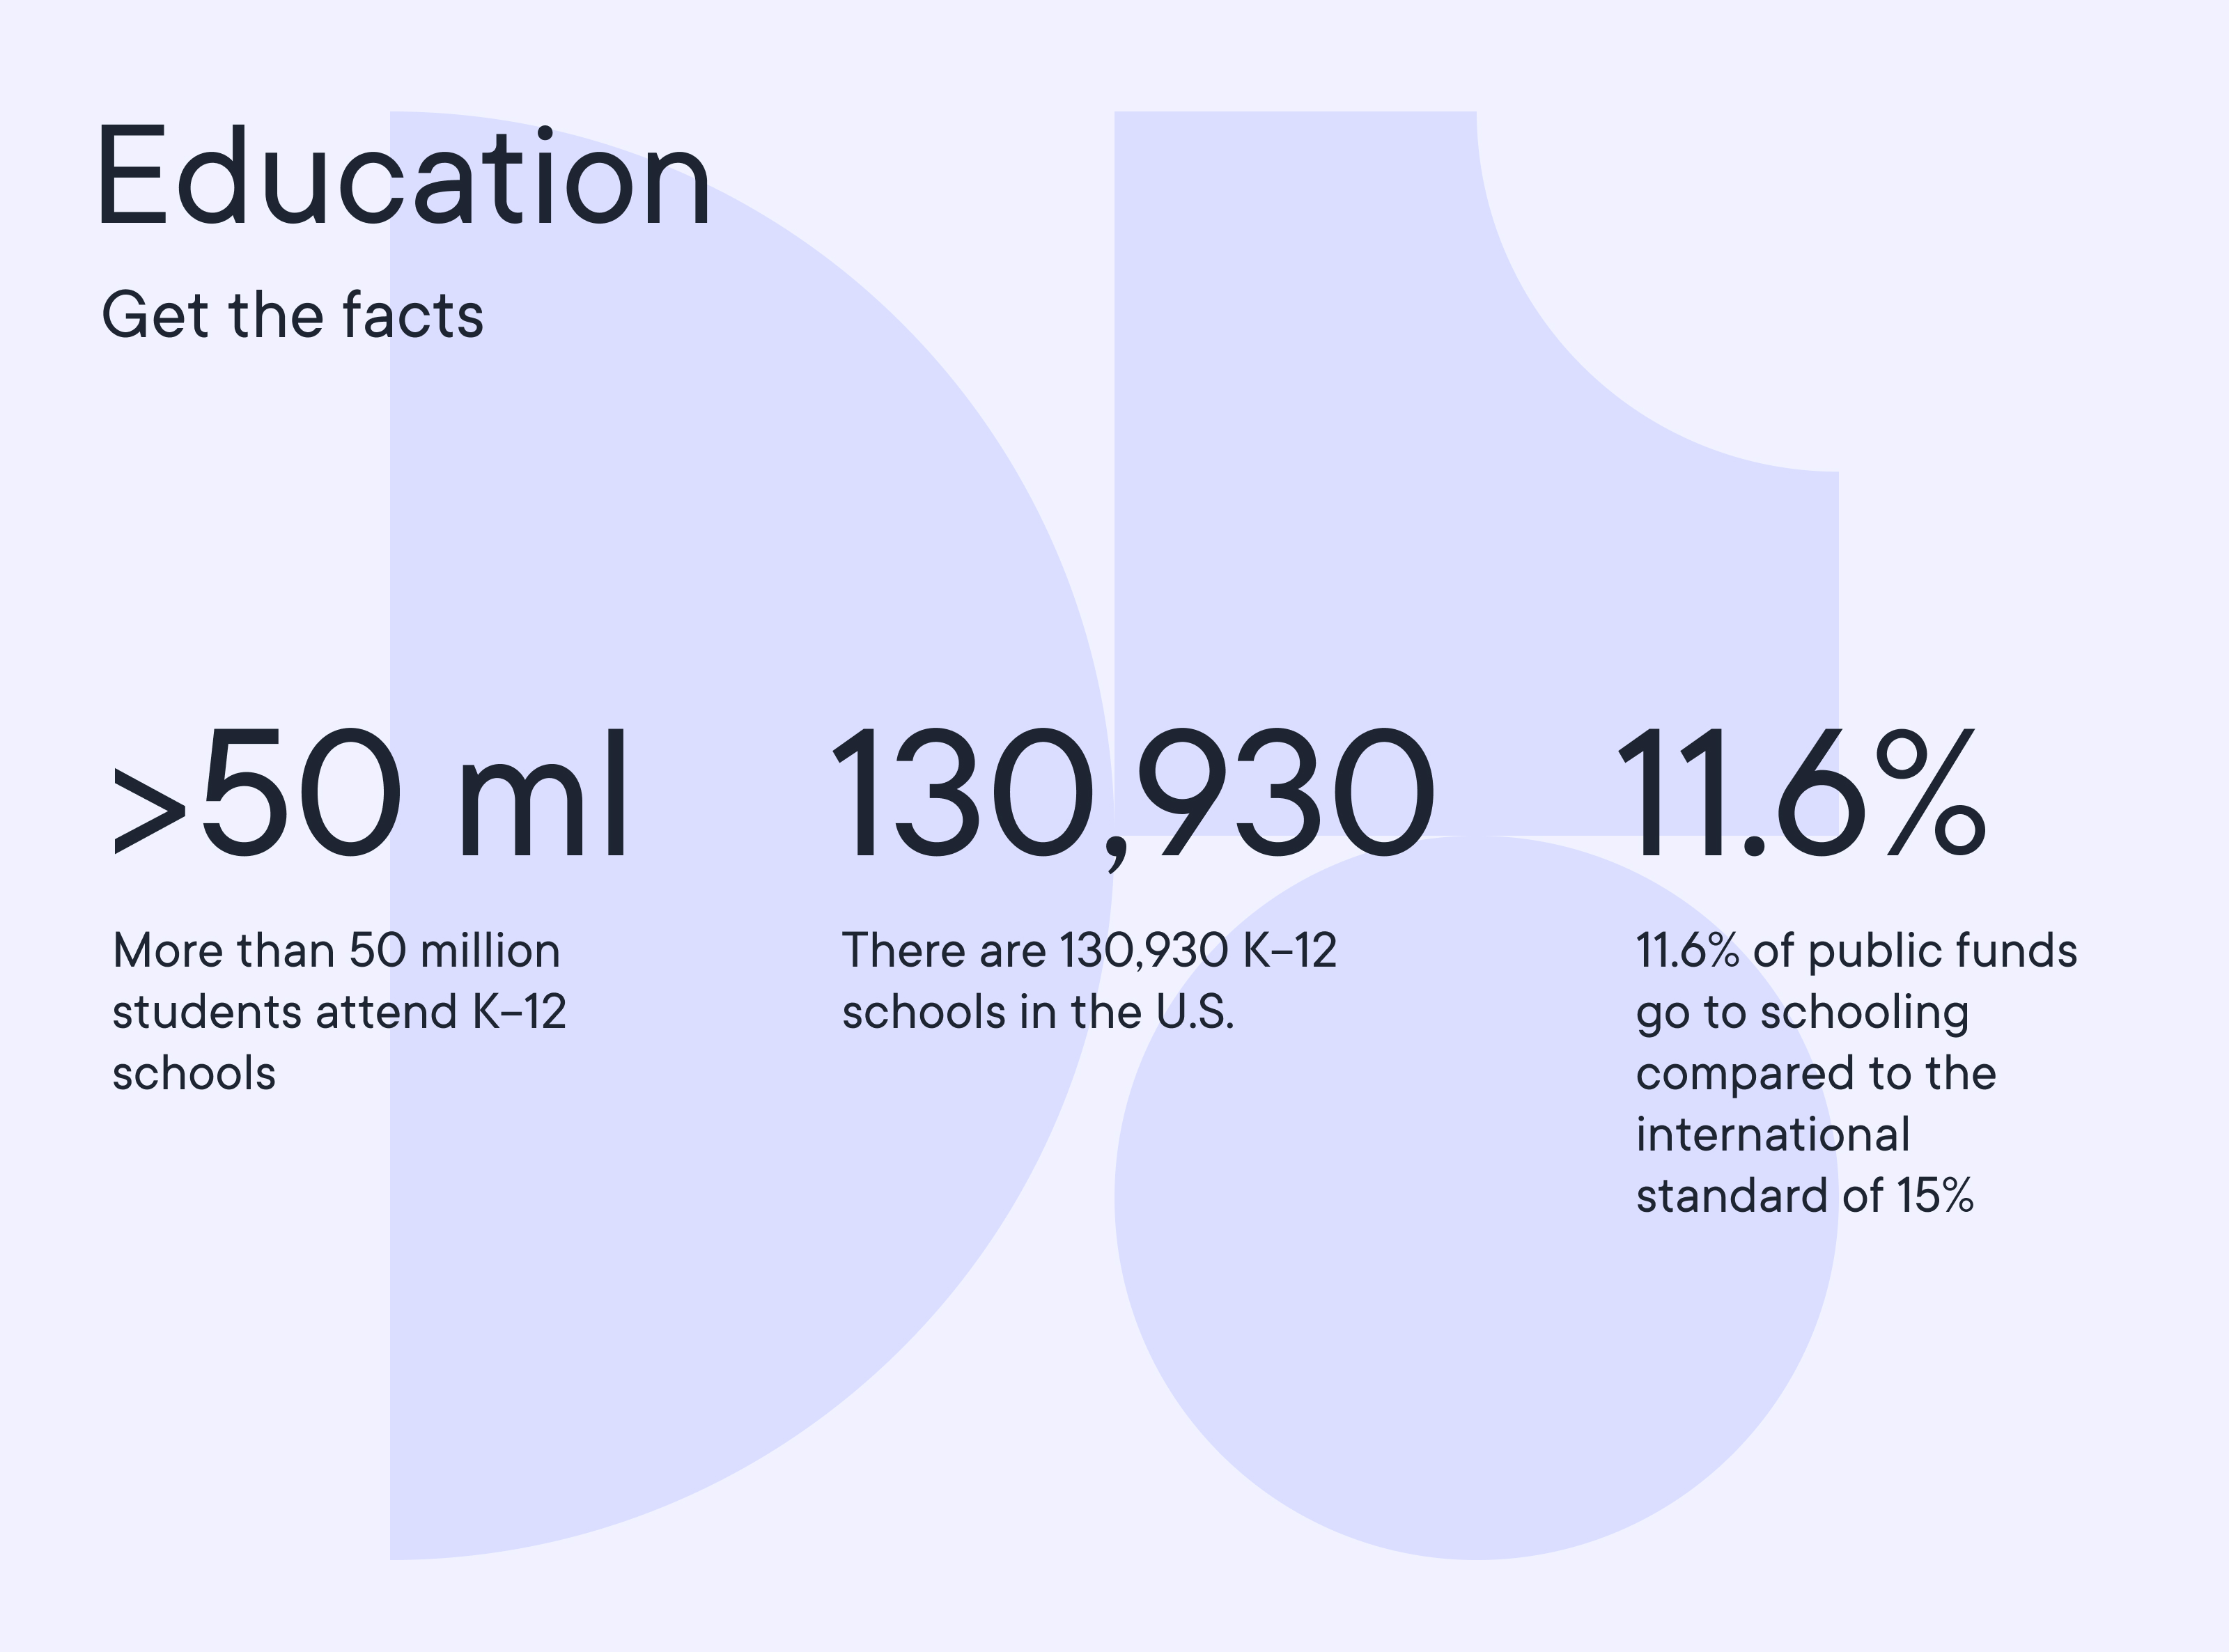 Education, get the facts. 11,6% of public funds go to schooling compared the international standard of 15%